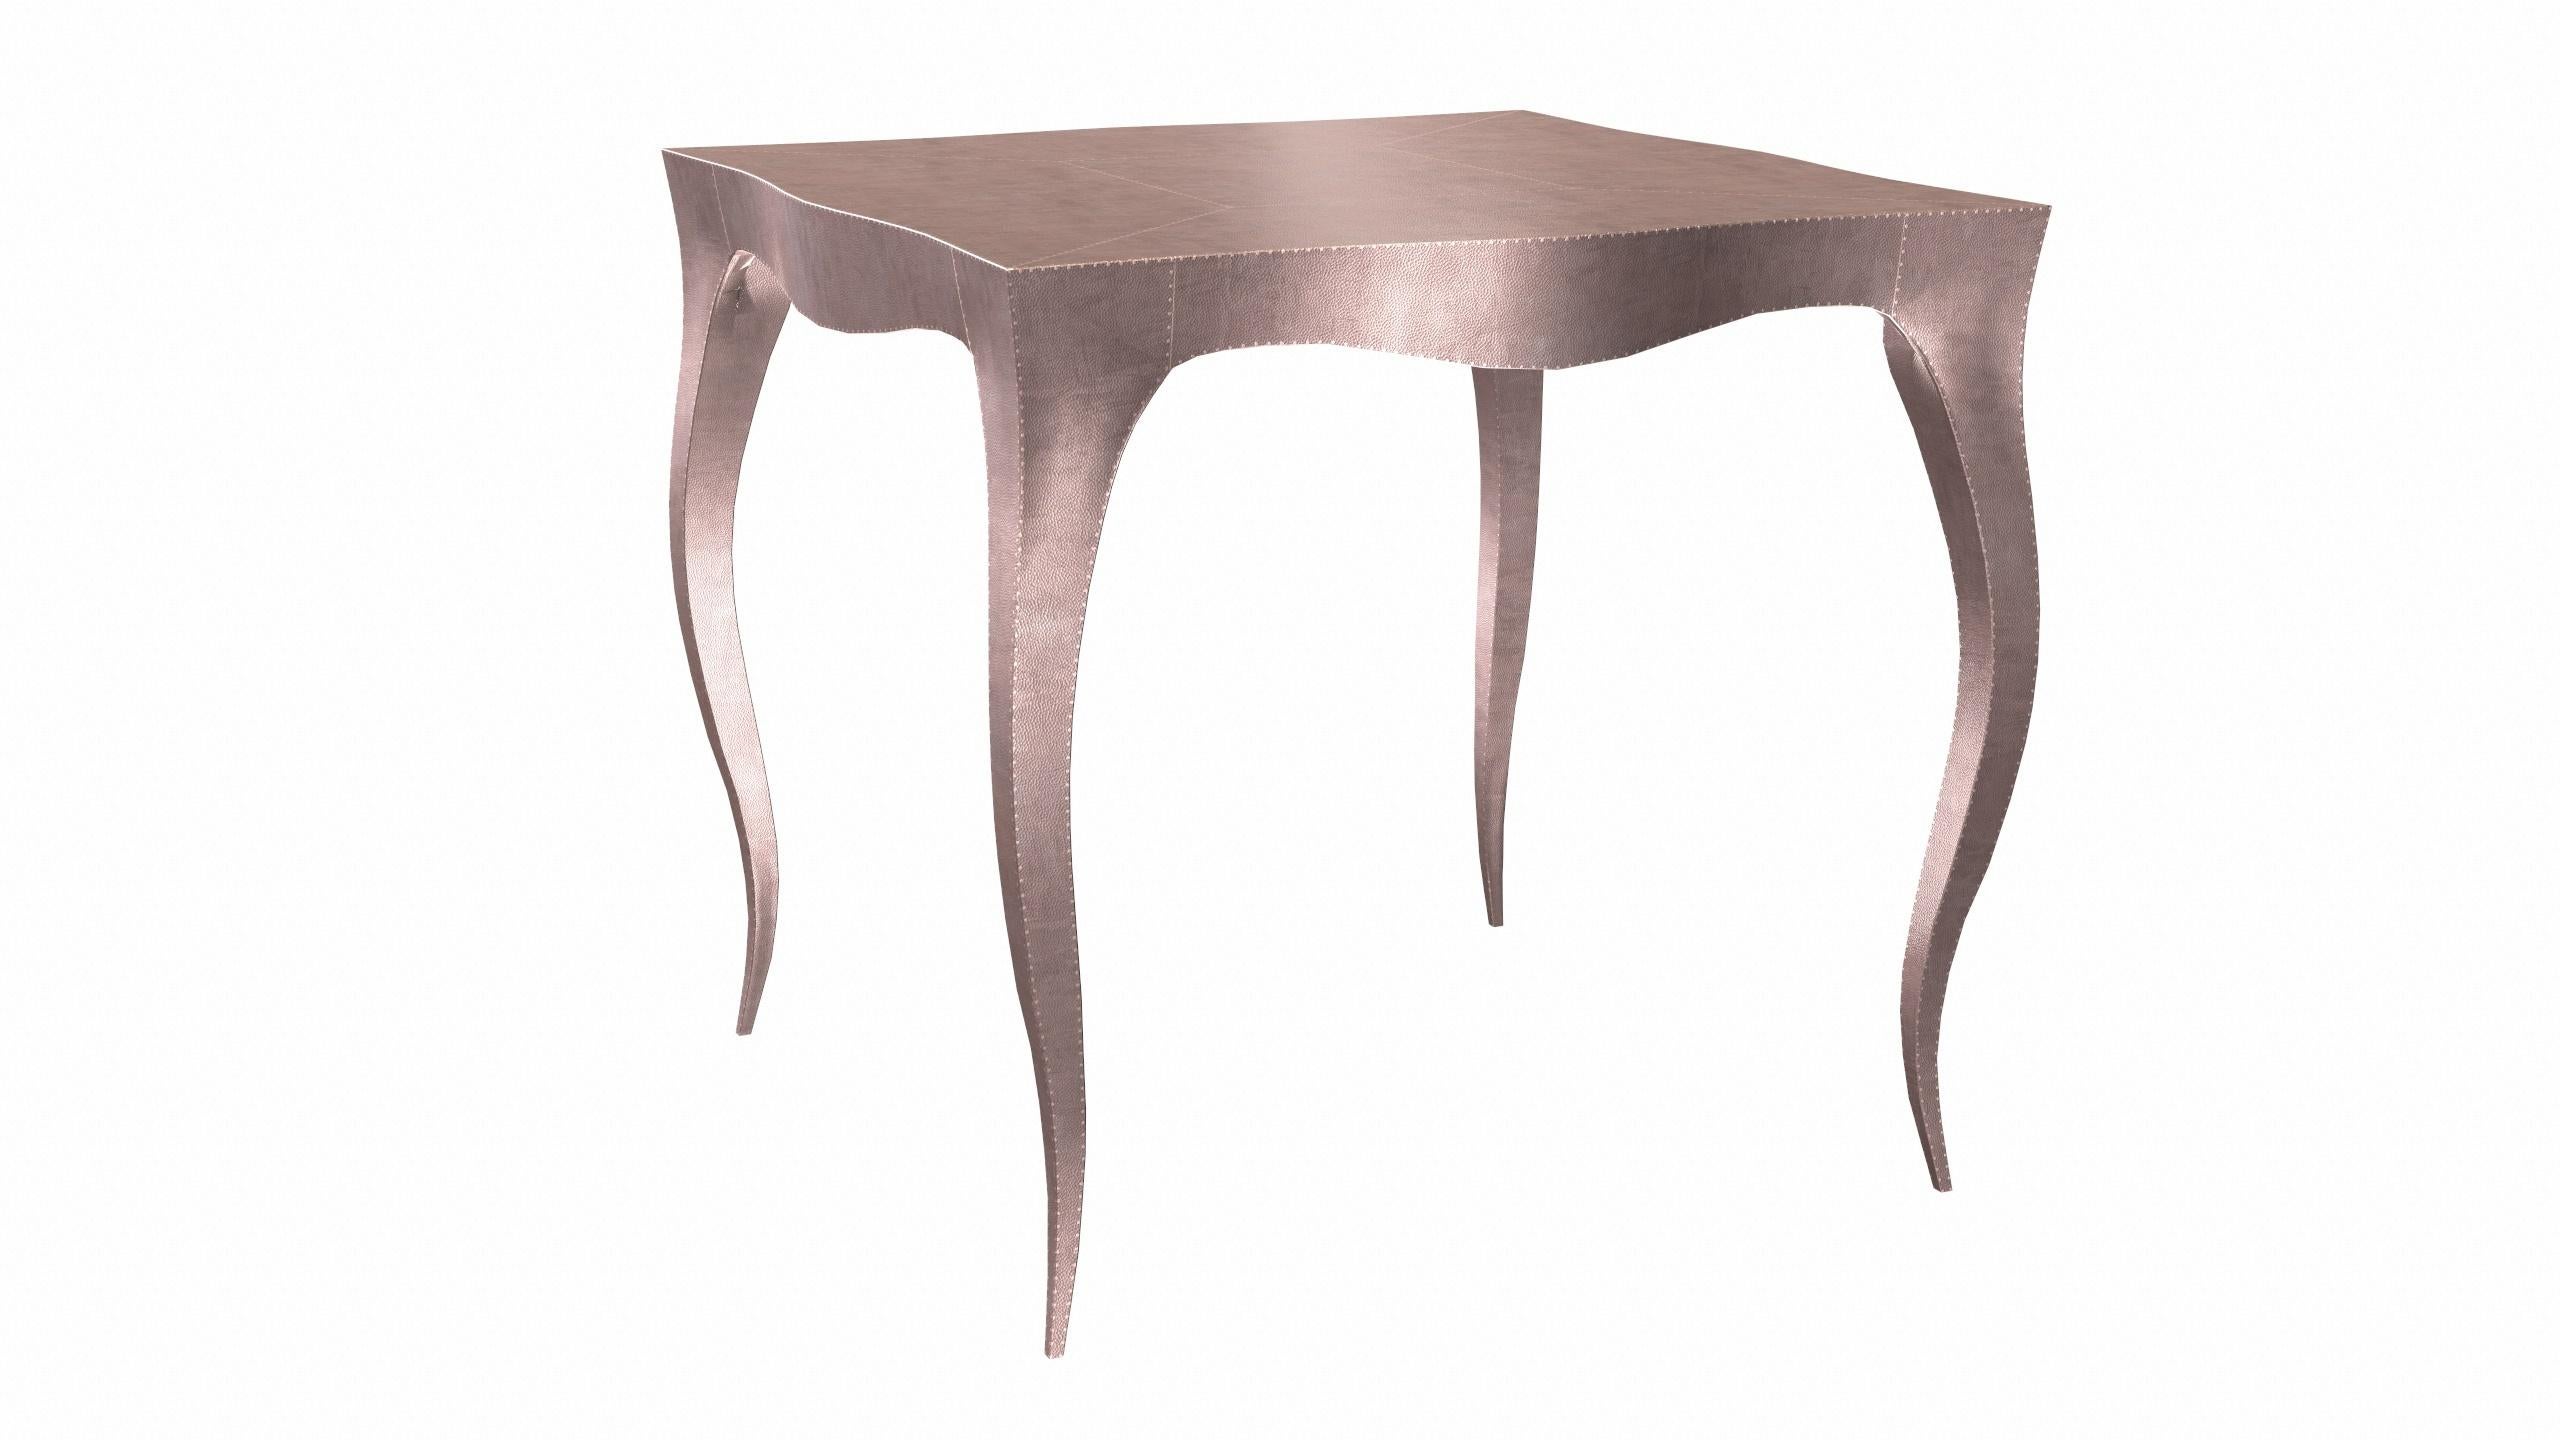 Hand-Carved Louise Art Nouveau Vanities Tables Mid. Hammered Copper by Paul Mathieu For Sale